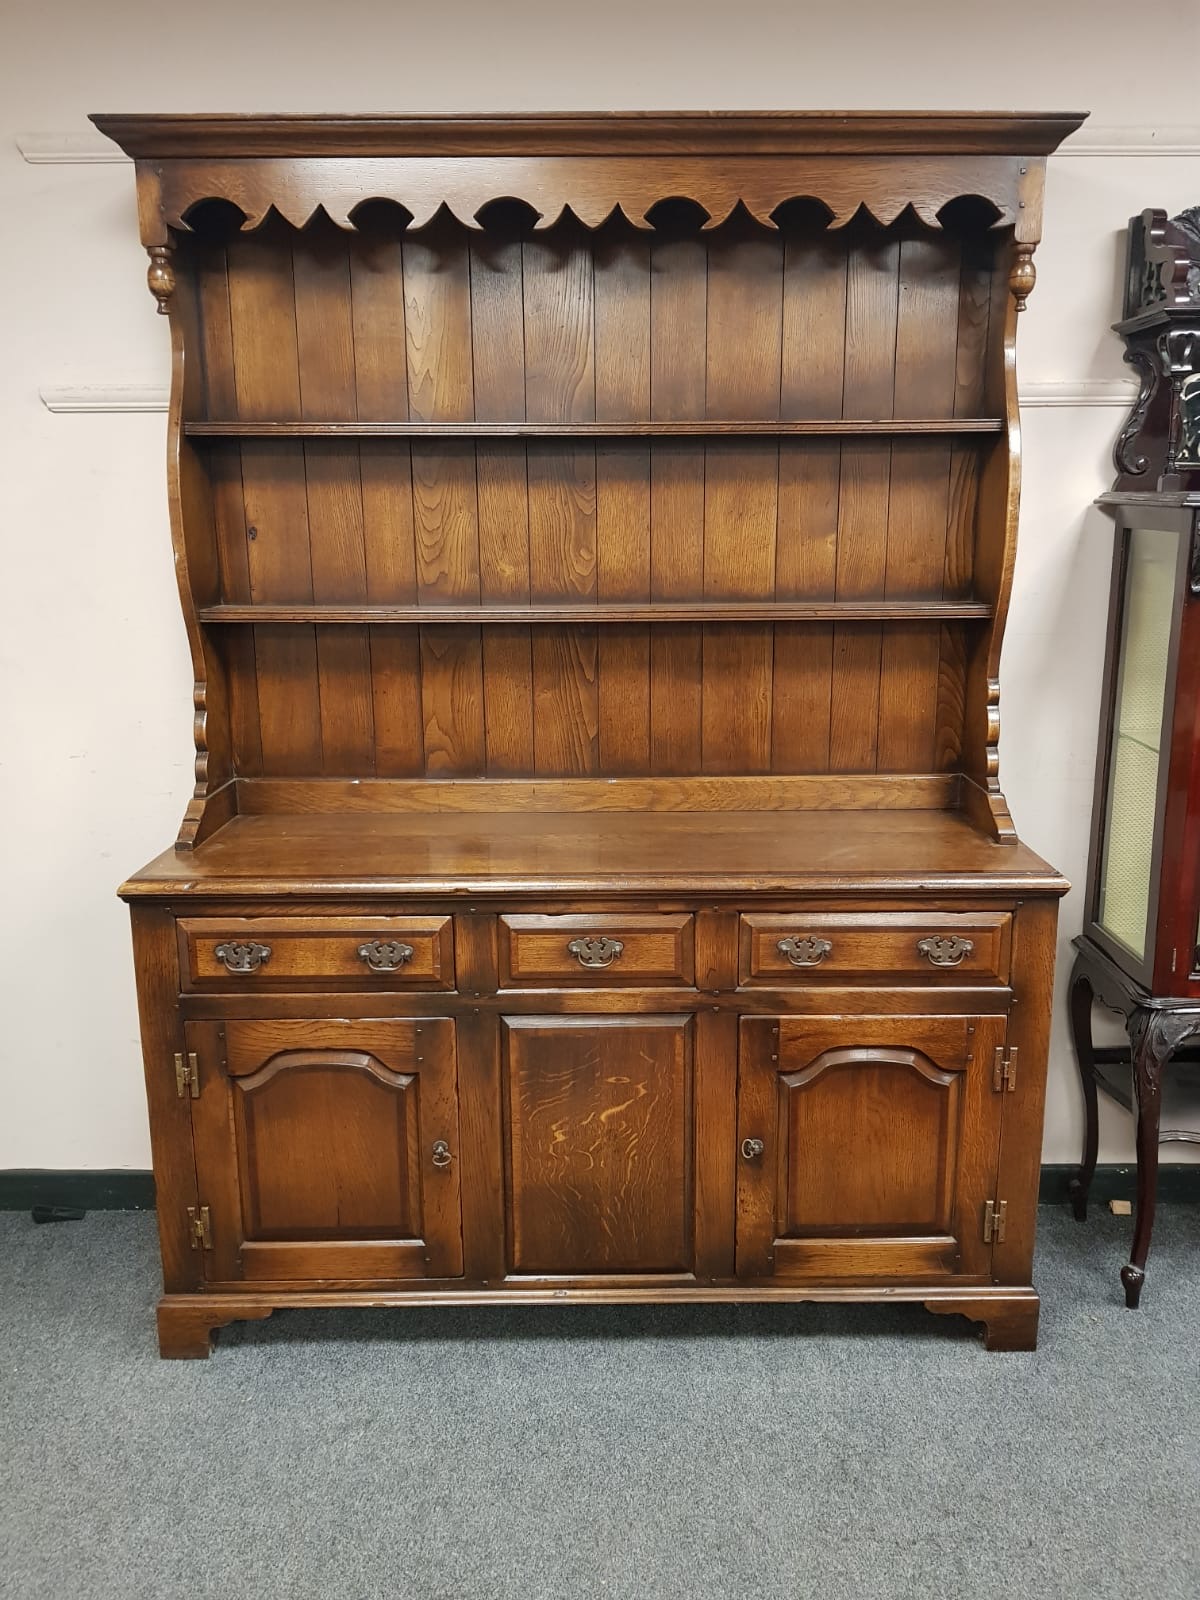 A Georgian style oak dresser fitted with drawers and cupboards,